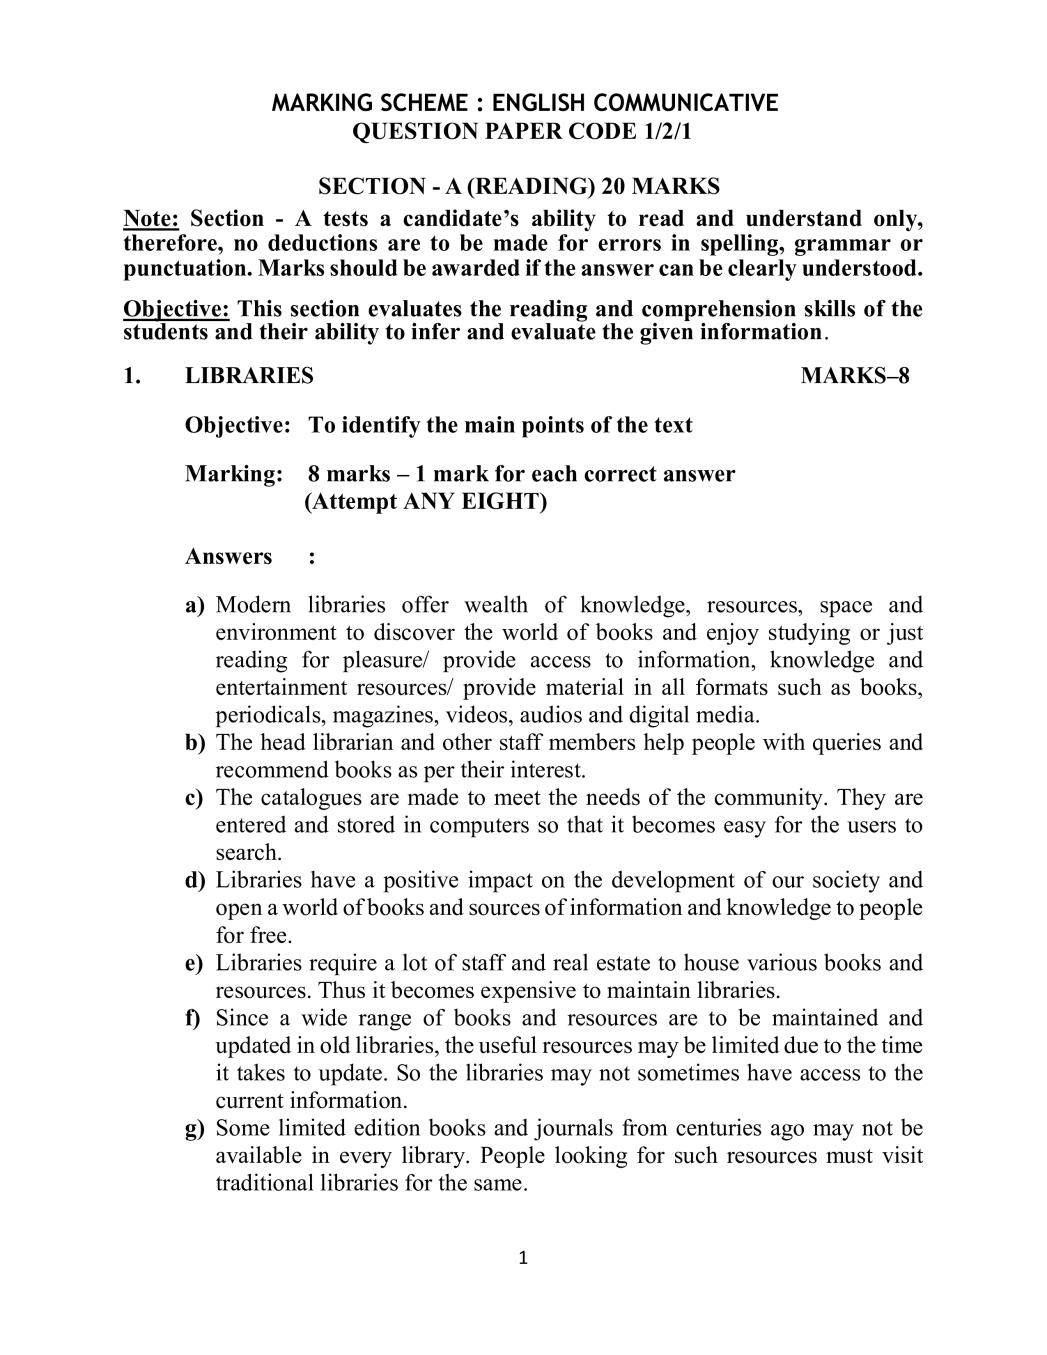 CBSE Class 10 English Communicative Question Paper 2019 Set 2 Solutions - Page 1